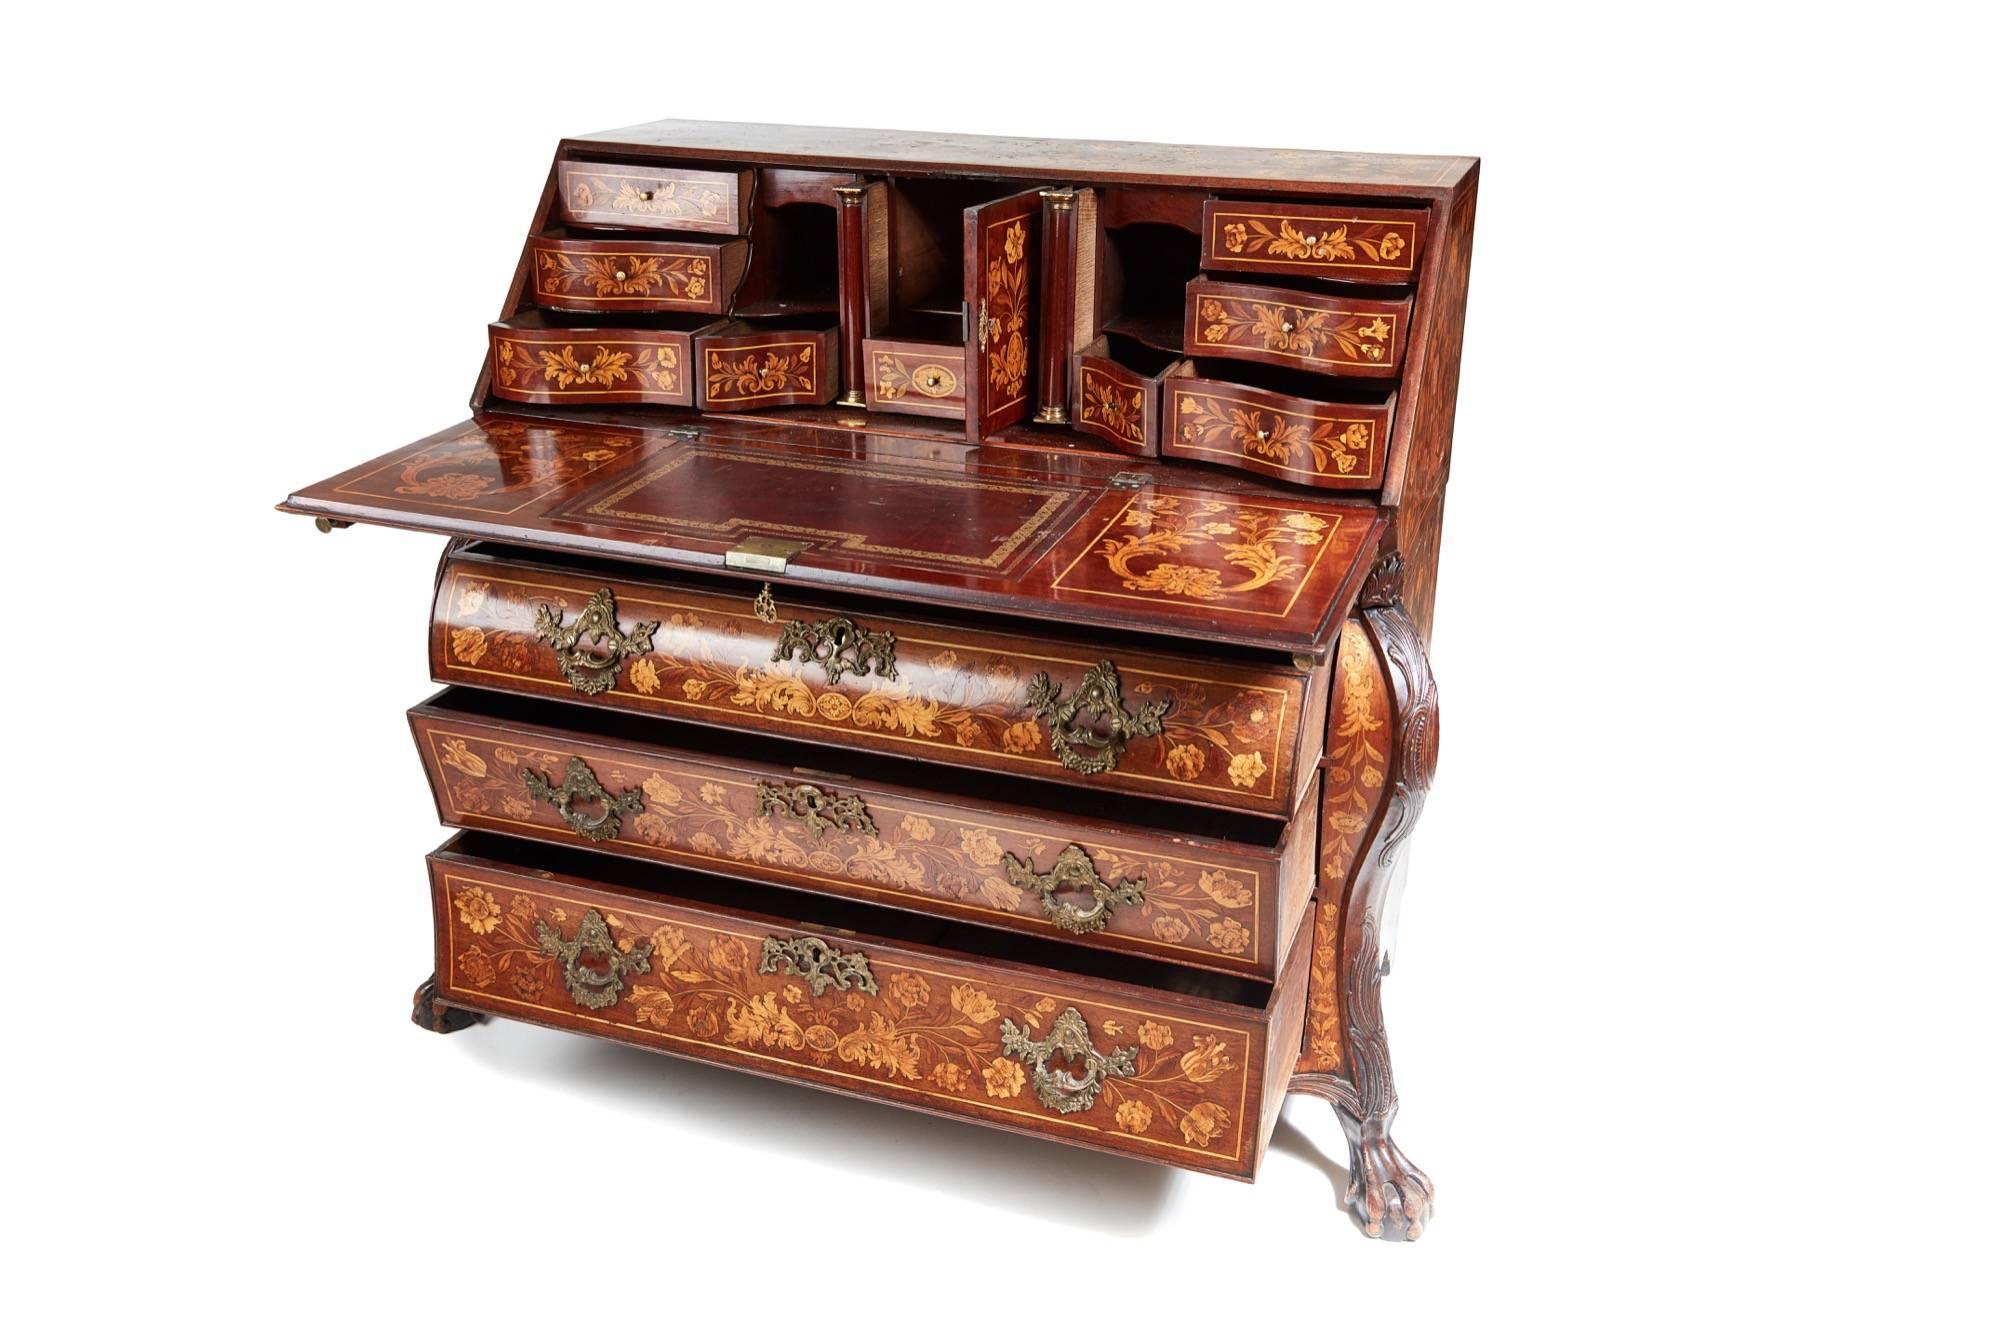 A fine quality 18th century Dutch walnut marquetry bureau with floral inlaid decoration with urns cascading flowers and birds, unusual carving to the fall enclosing a fitted interior of serpentine form with pigeon holes, drawers, bookends, well, and